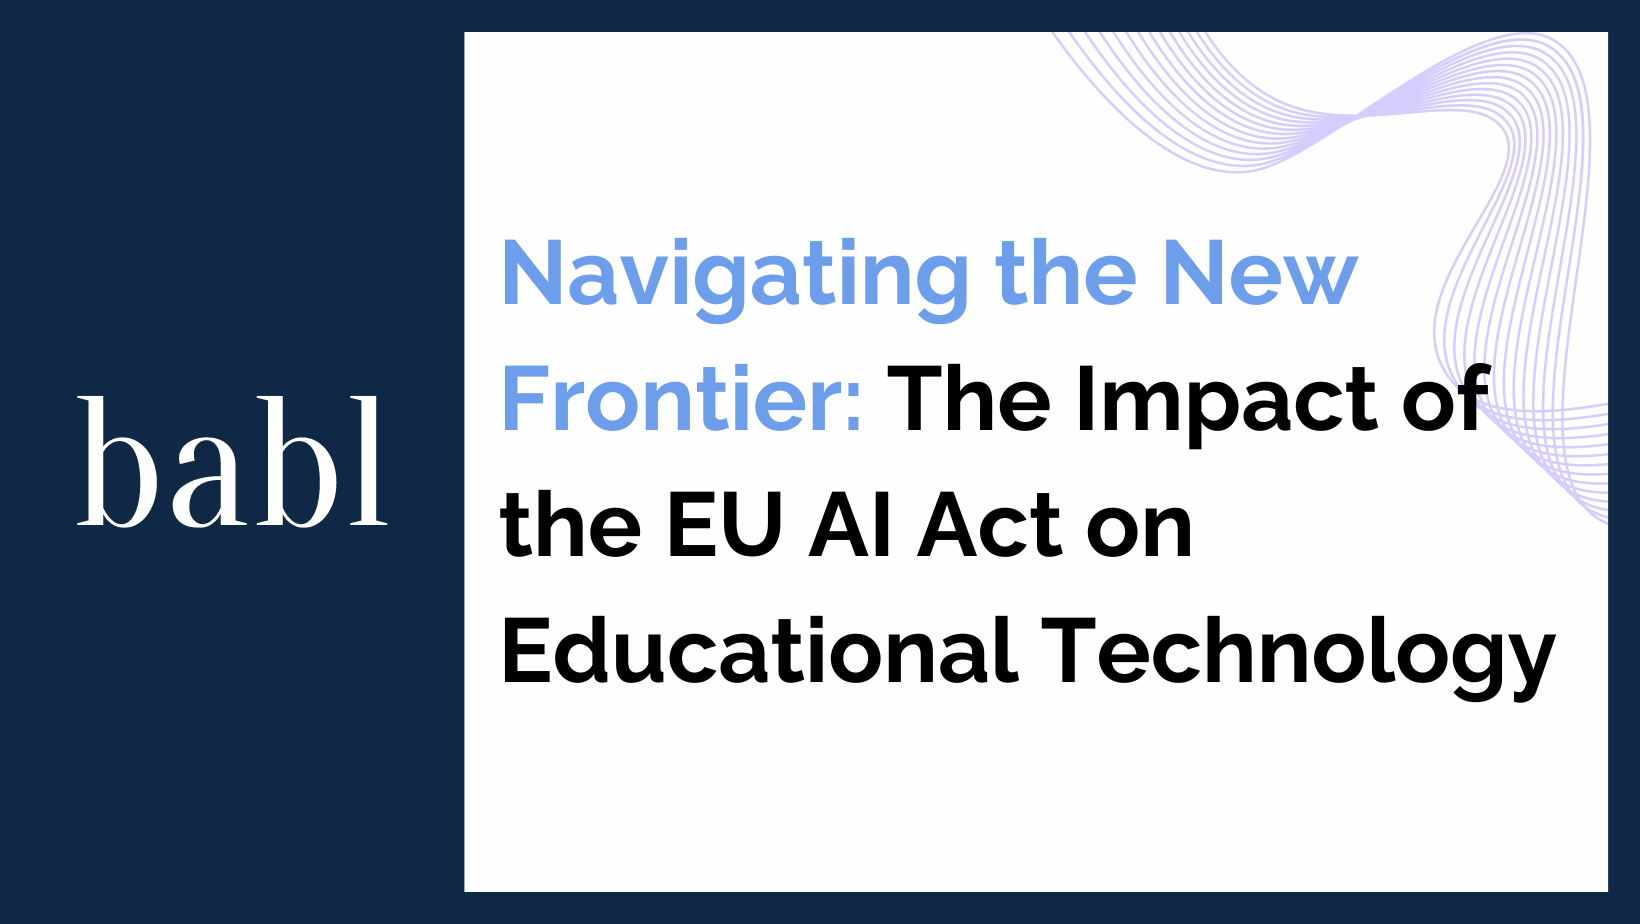 Navigating the New Frontier: The Impact of the EU AI Act on Educational Technology